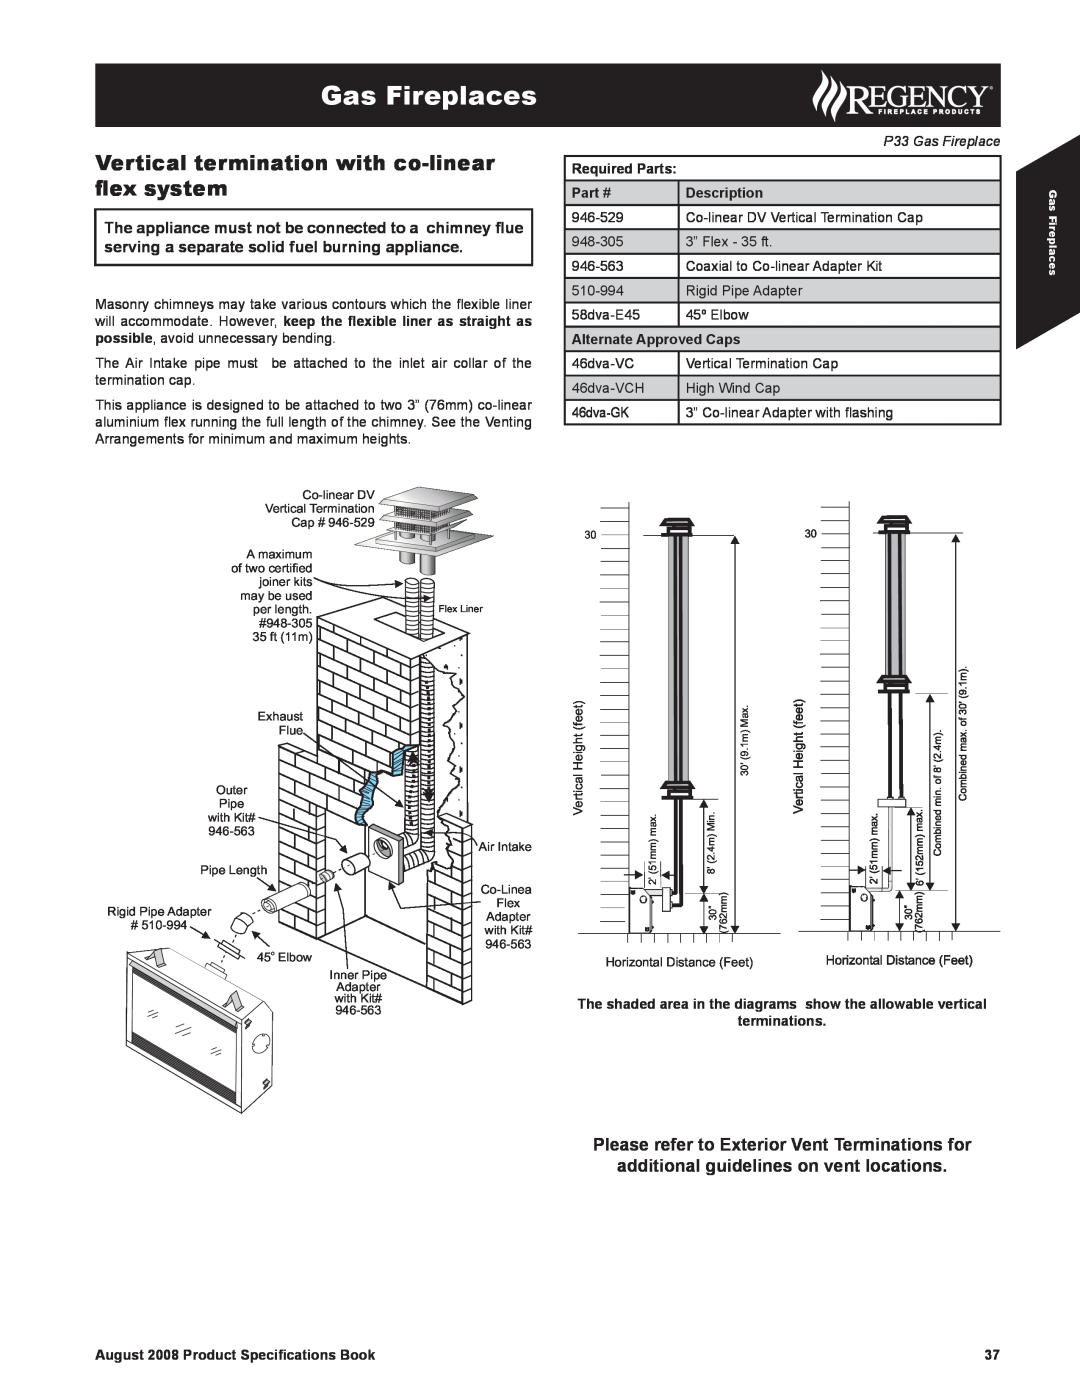 Regency 510-994 Vertical termination with co-linearﬂex system, Gas Fireplaces, additional guidelines on vent locations 